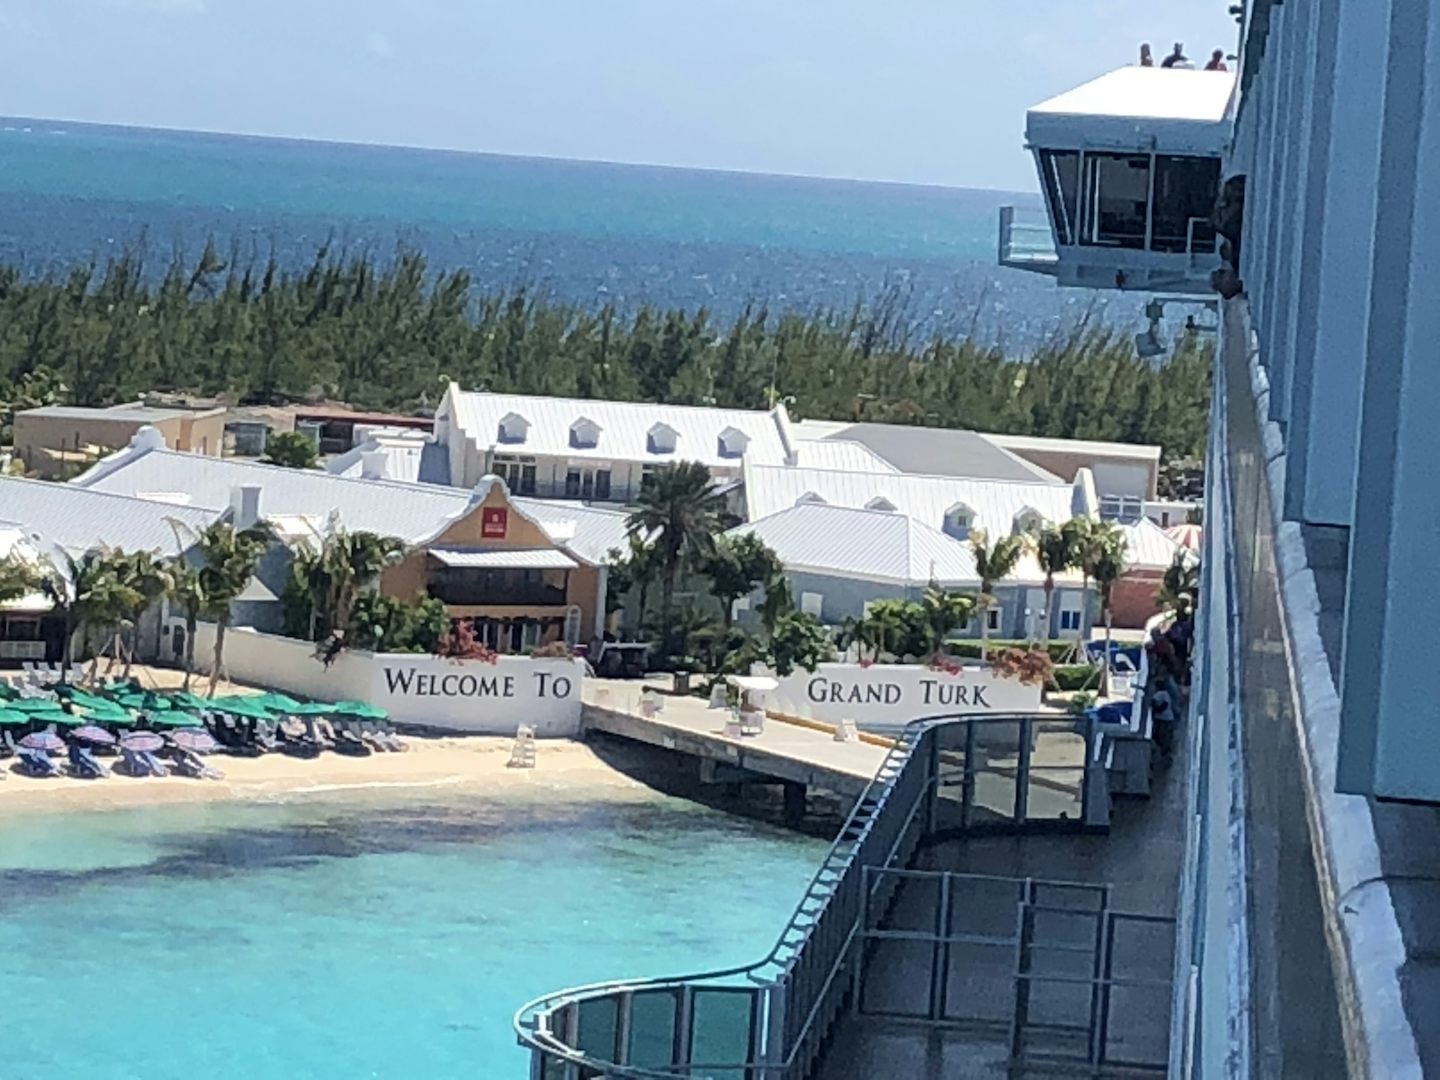 The wharf view in Grand Turk